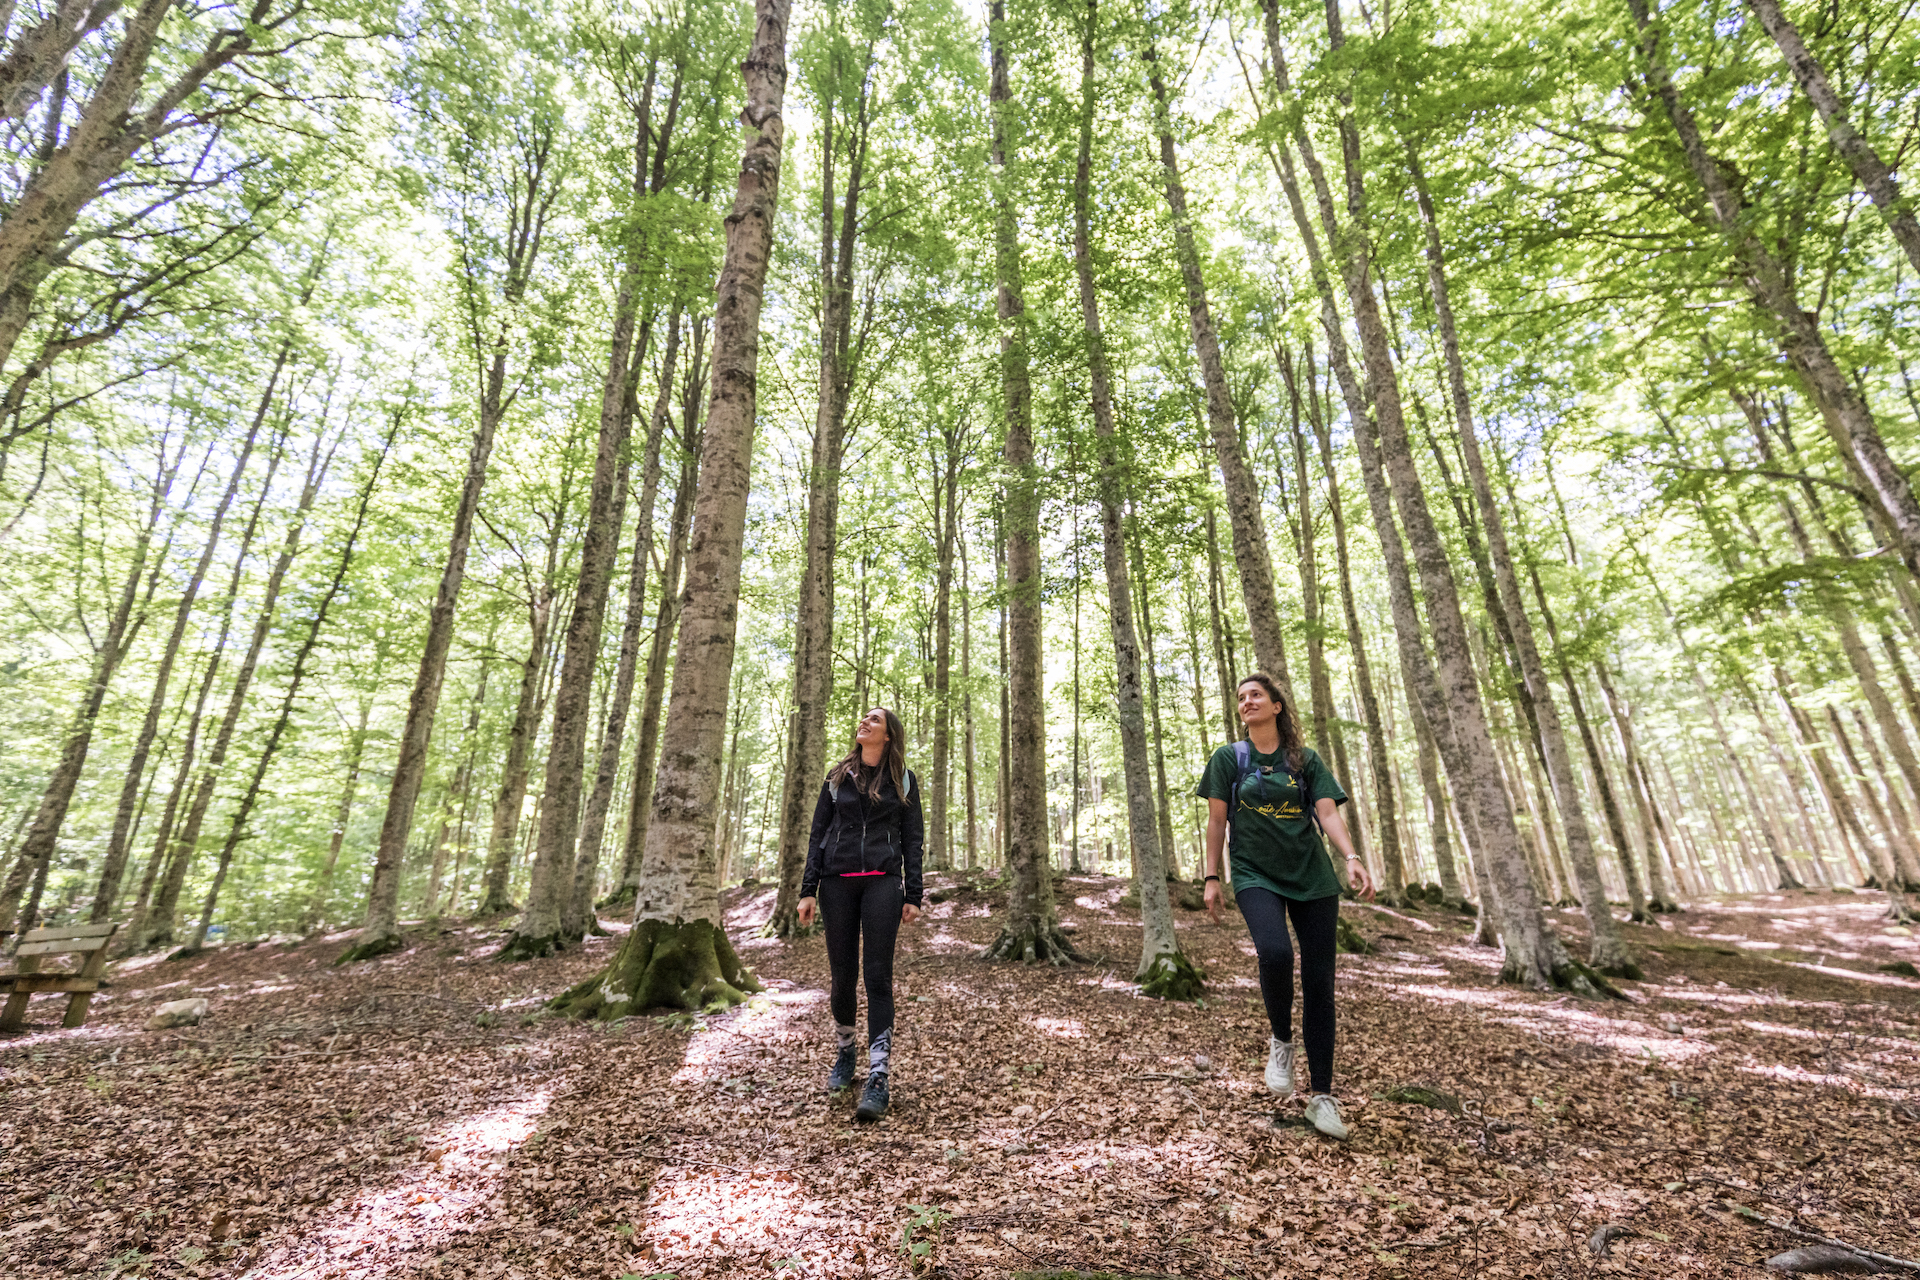 Forest bathing in the Amiata wood of beech trees